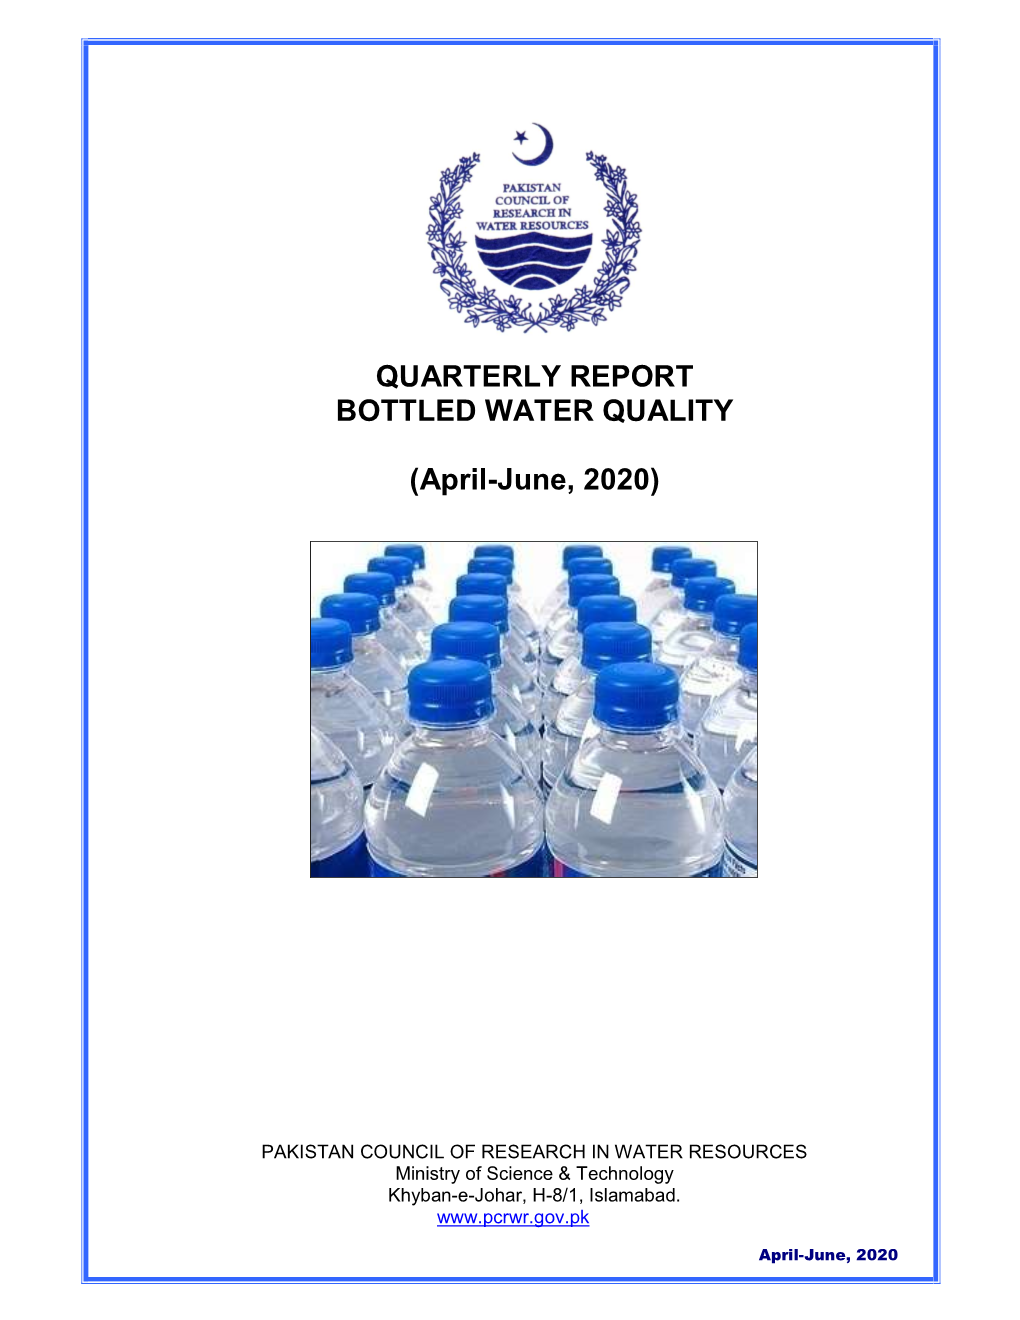 QUARTERLY REPORT BOTTLED WATER QUALITY (April-June, 2020)